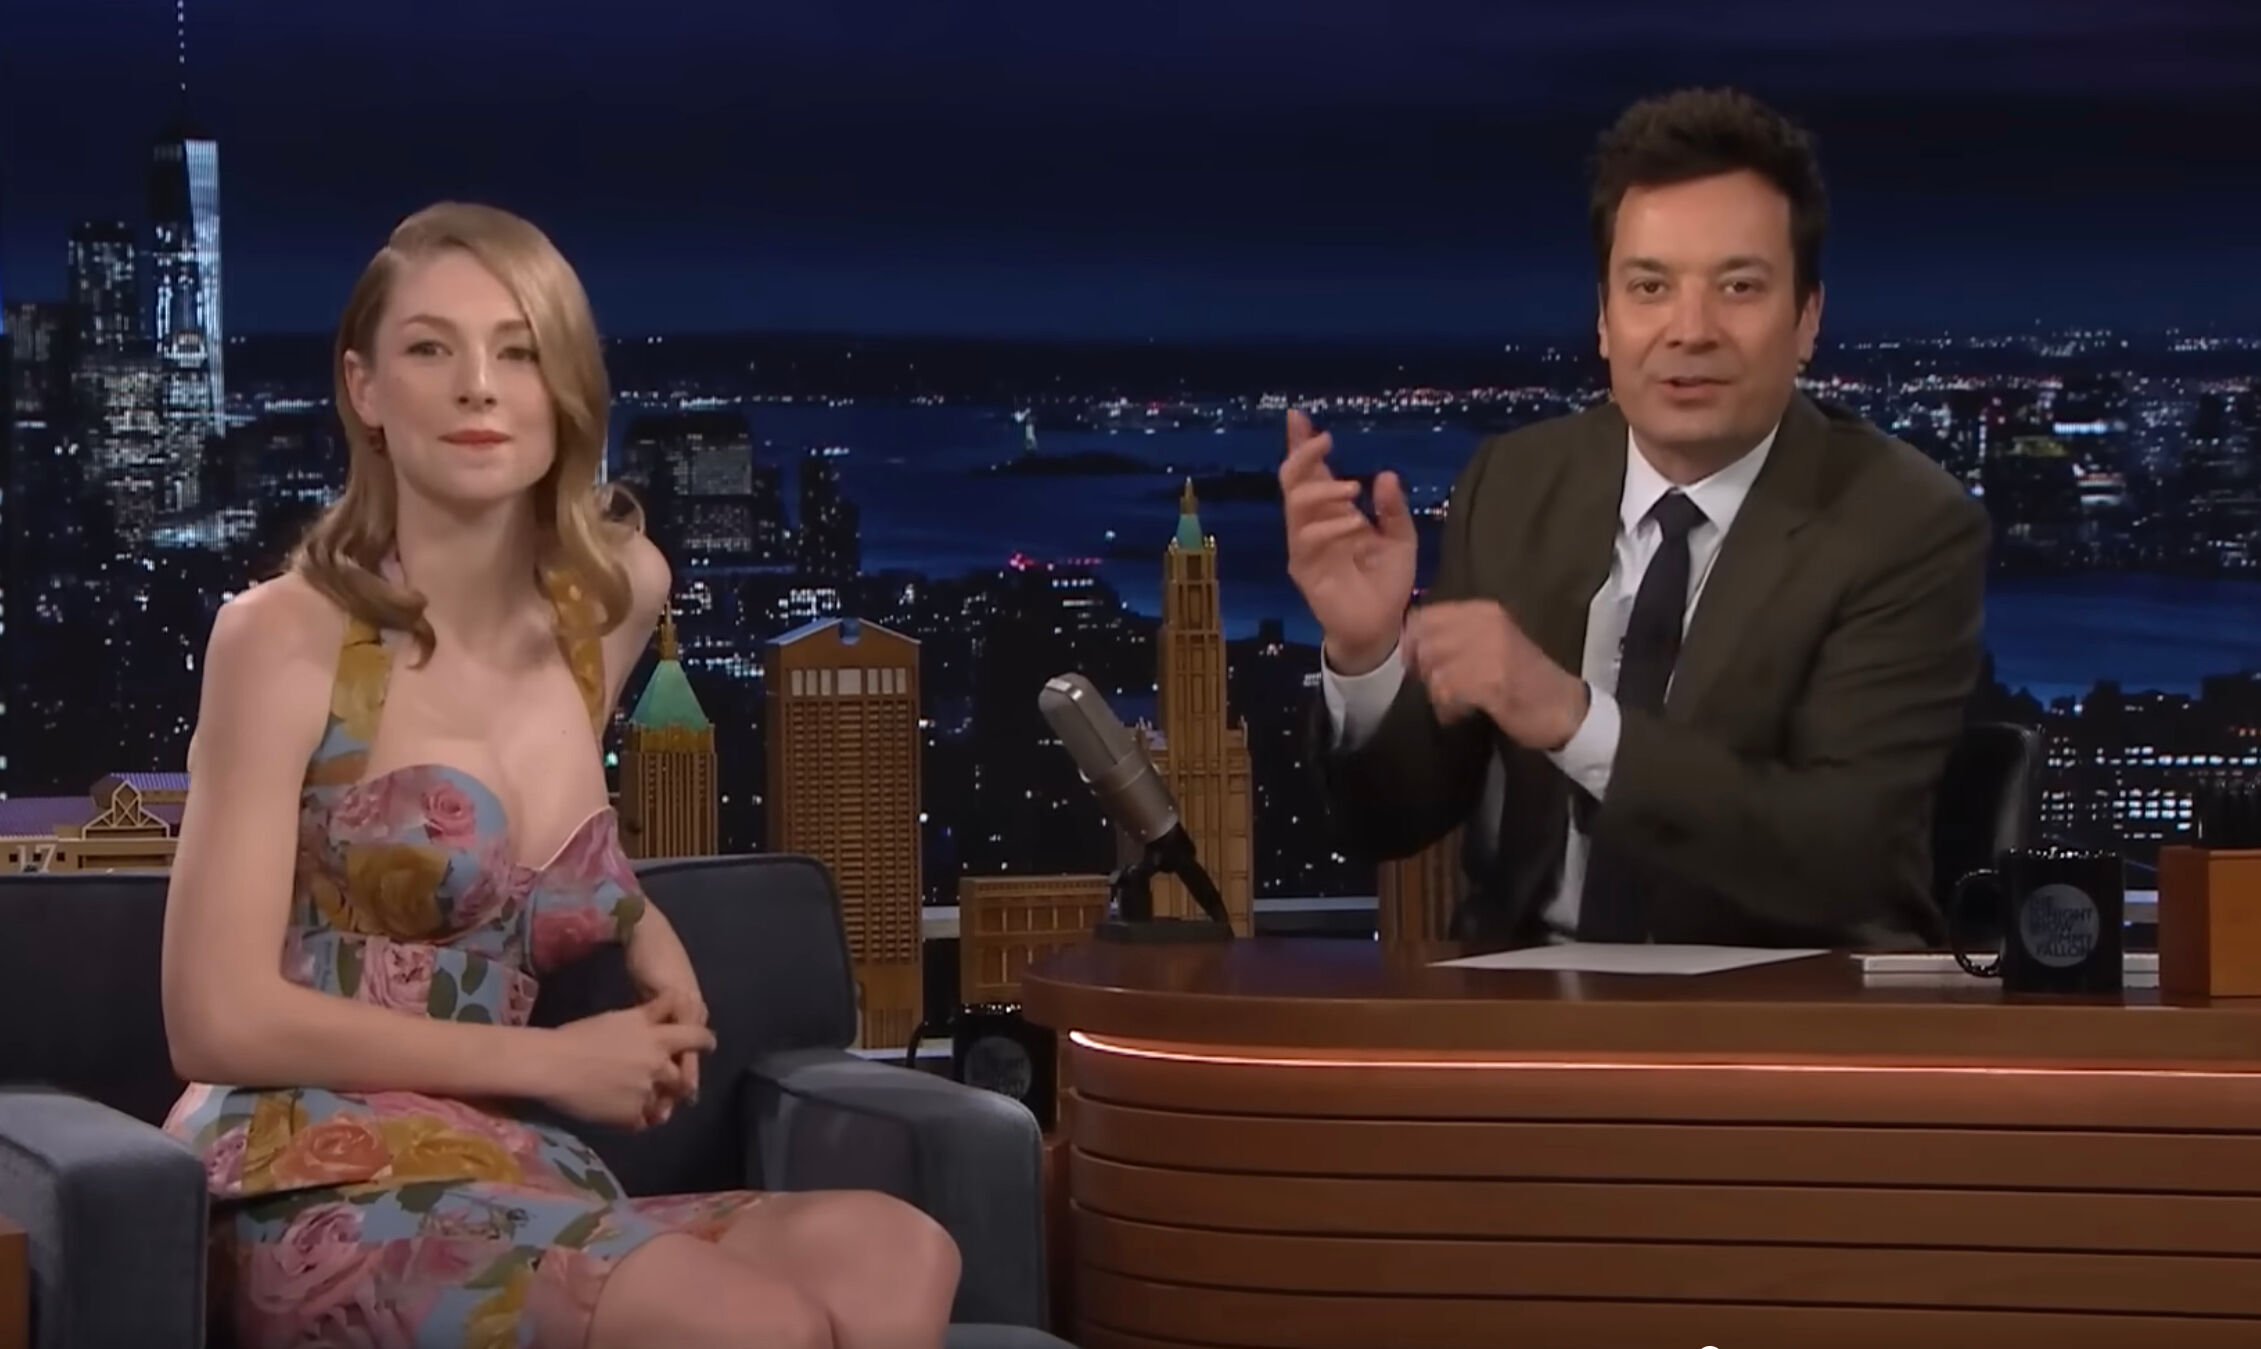 Hunter Schafer and Jimmy Fallon on The Tonight Show